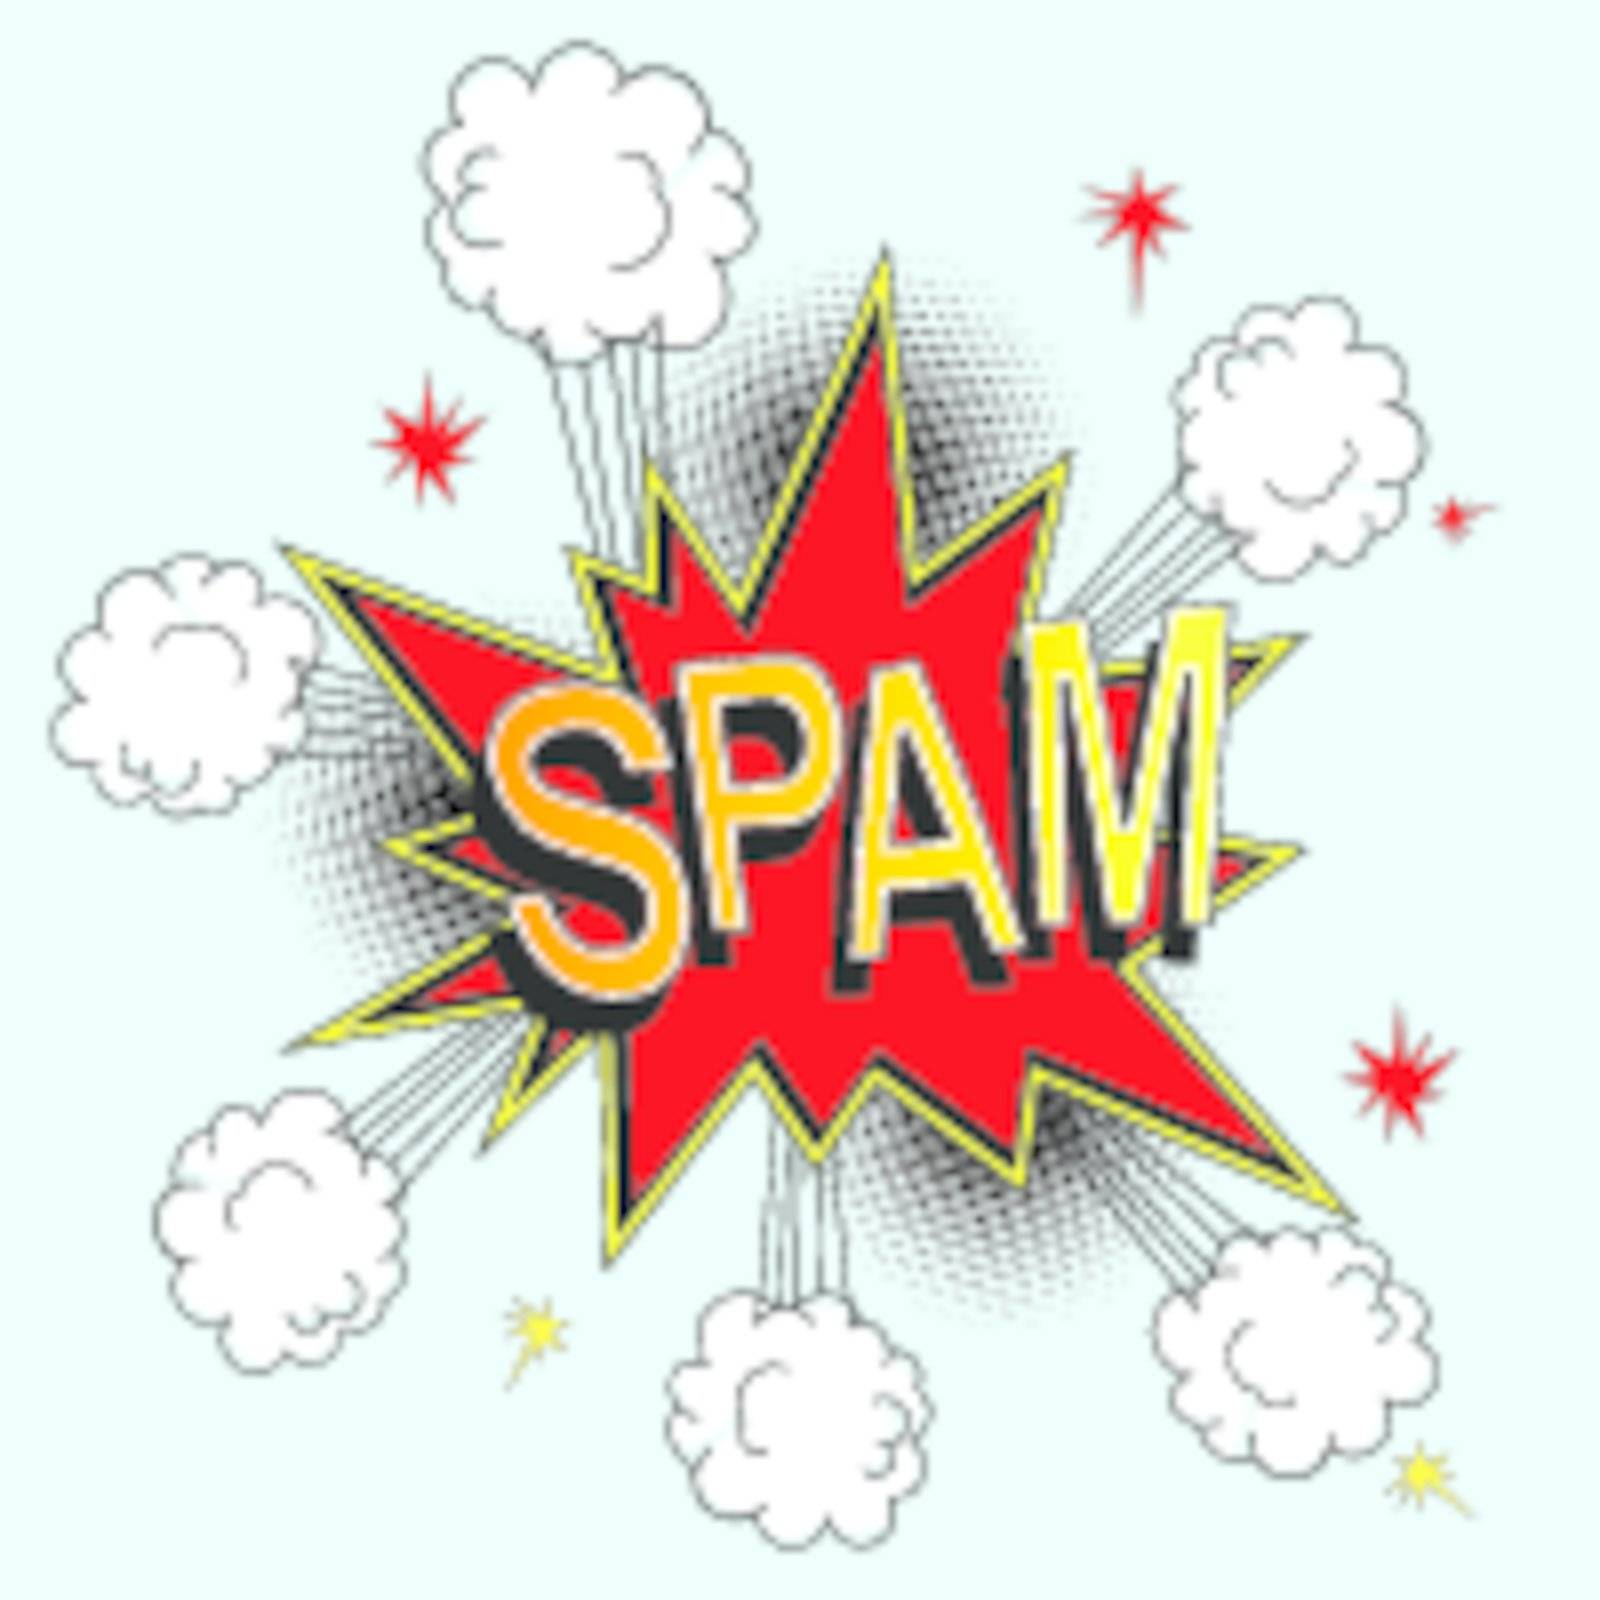 Spam icon comic style by Lirch